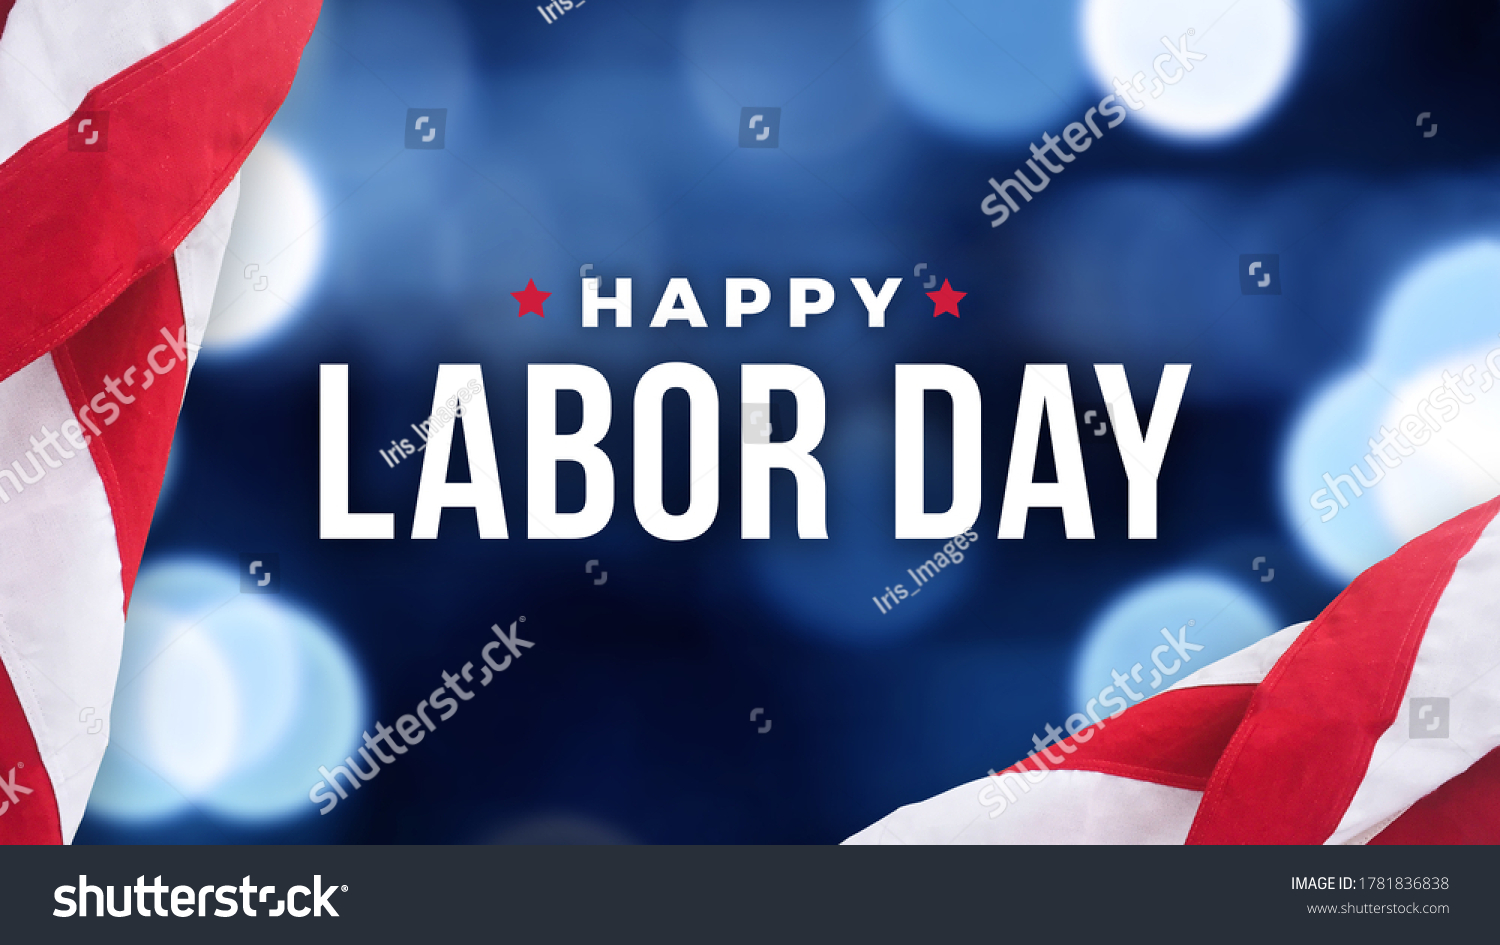 Happy Labor Day Text Over Defocused Blue Bokeh Lights Background with Patriotic American Flags Border #1781836838